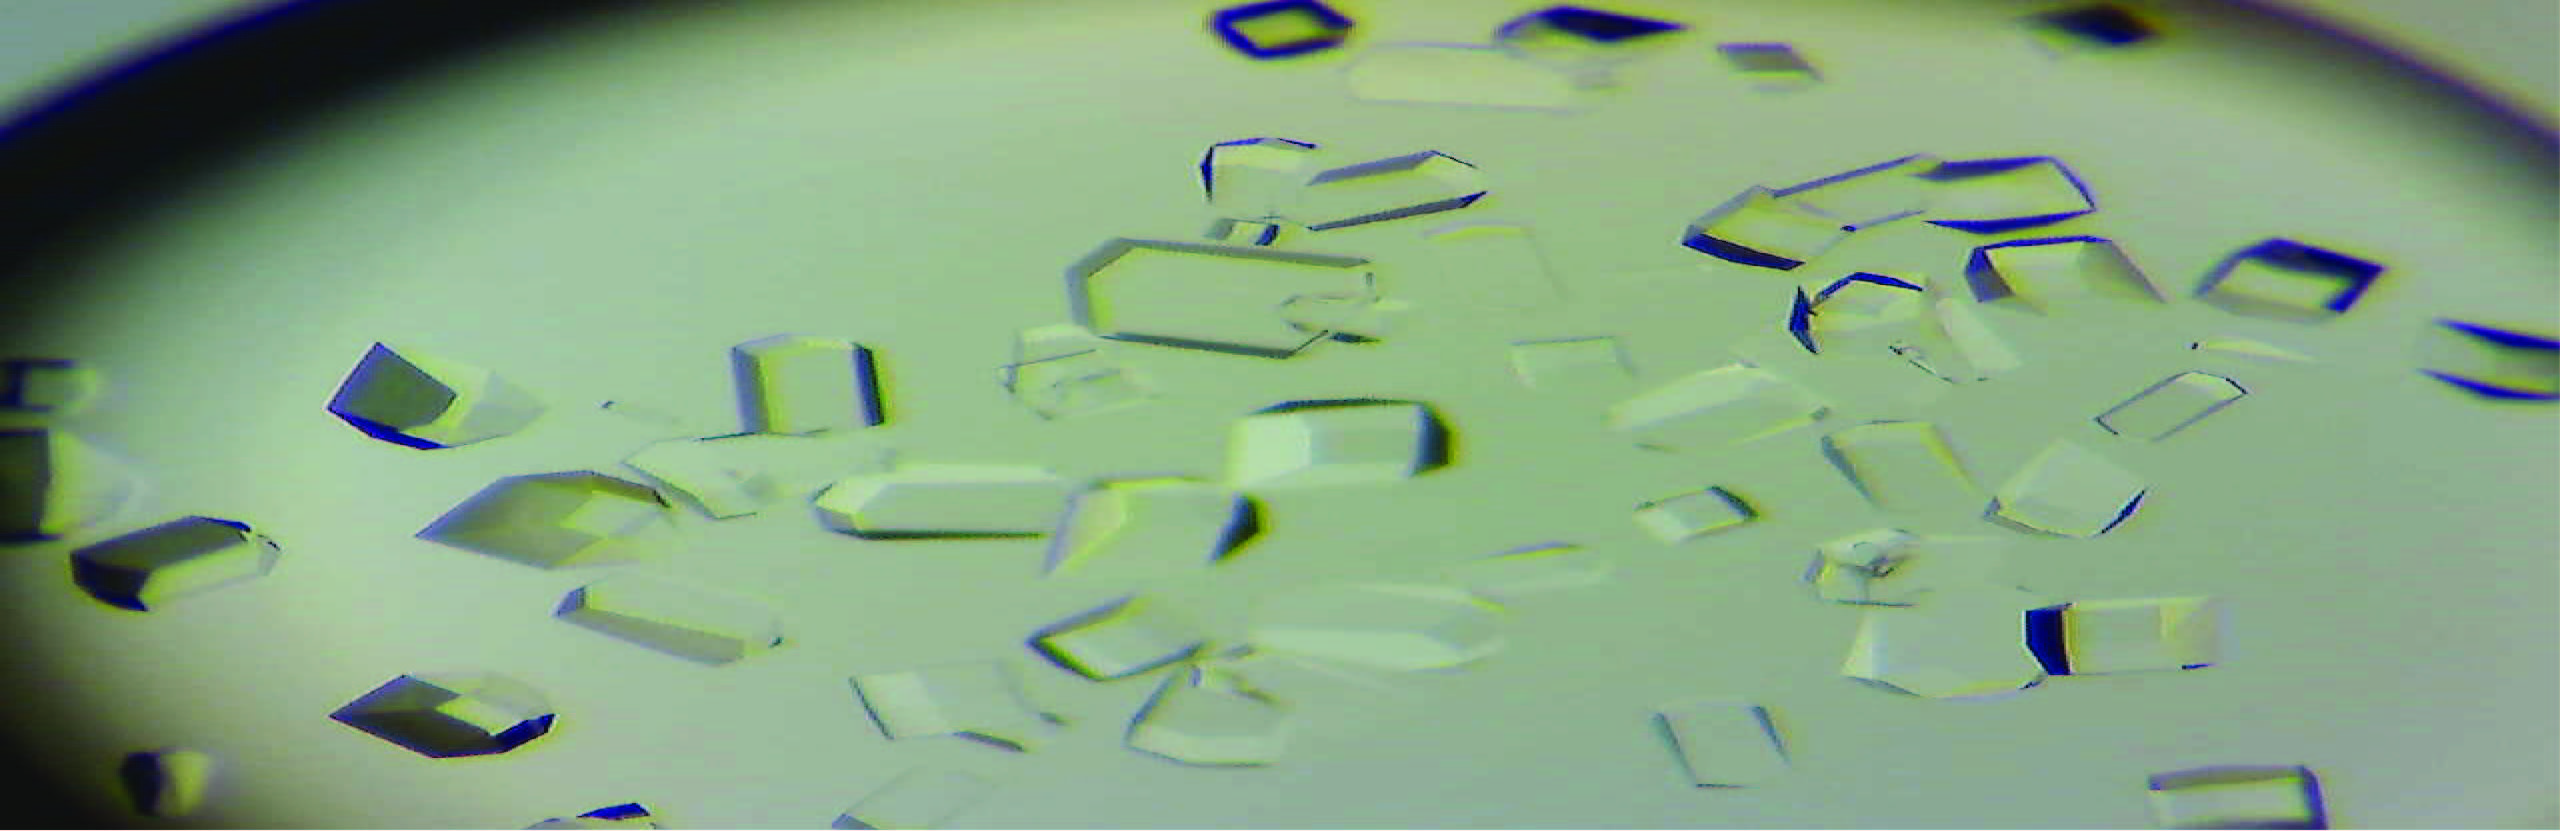 image of crystals under microscope